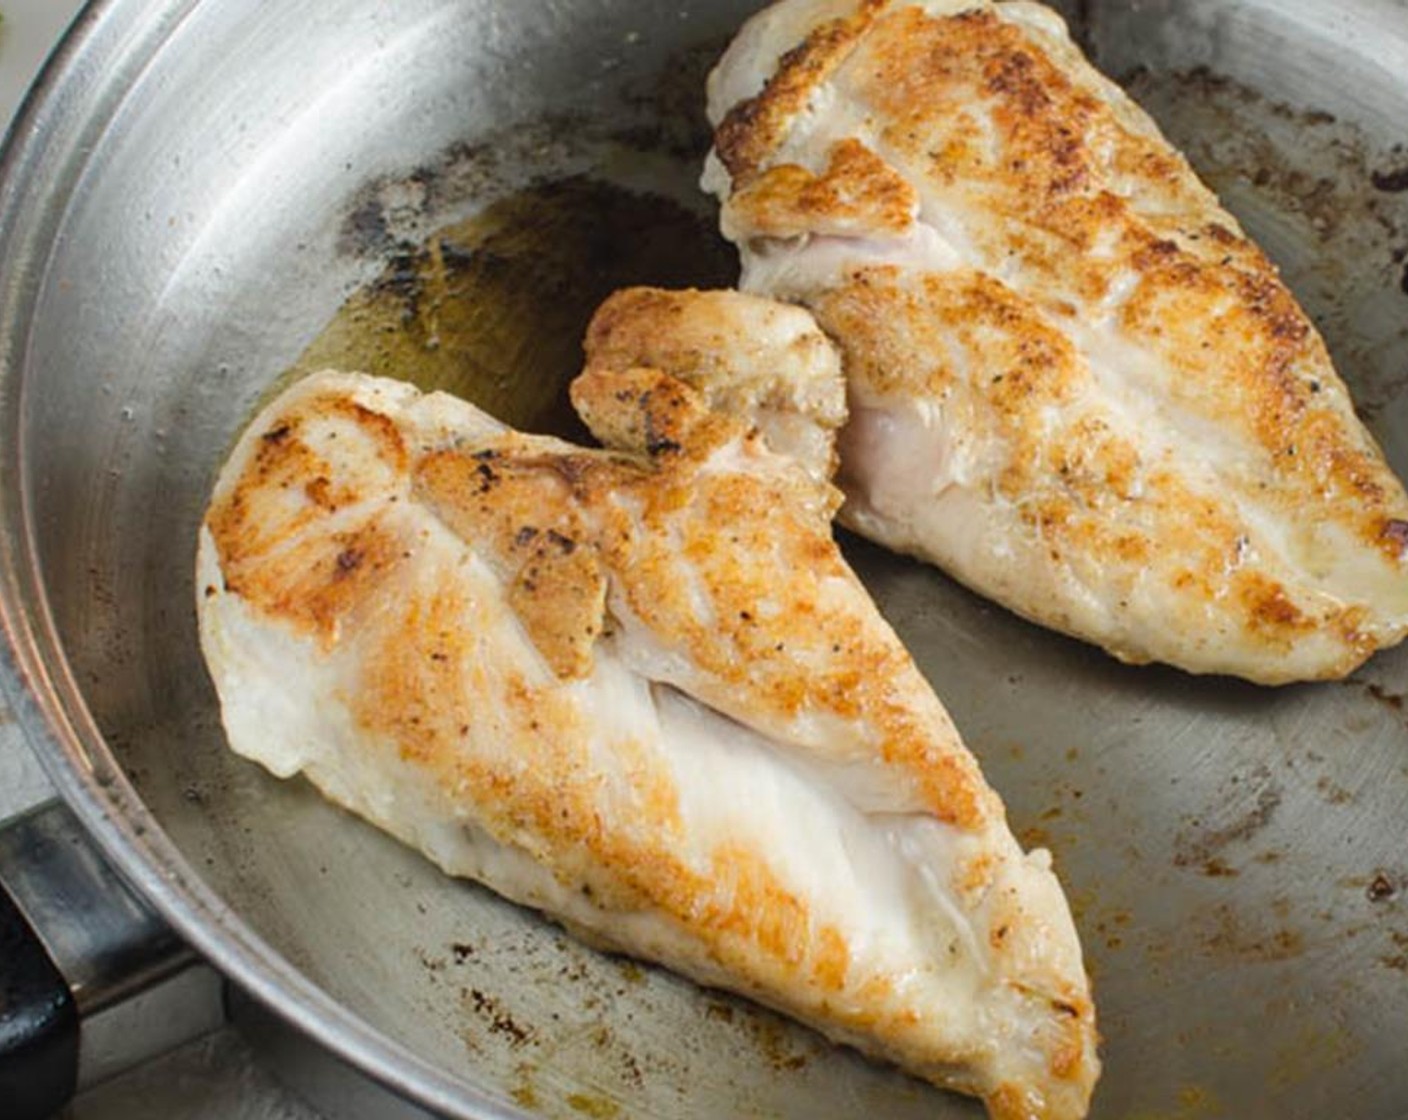 step 2 In a skillet over medium high heat, add the Olive Oil (2 Tbsp). Carefully add the organic chicken breasts to the hot skillet and cook for 3-4 minutes on each side until golden brown. Transfer organic chicken breasts to a plate.